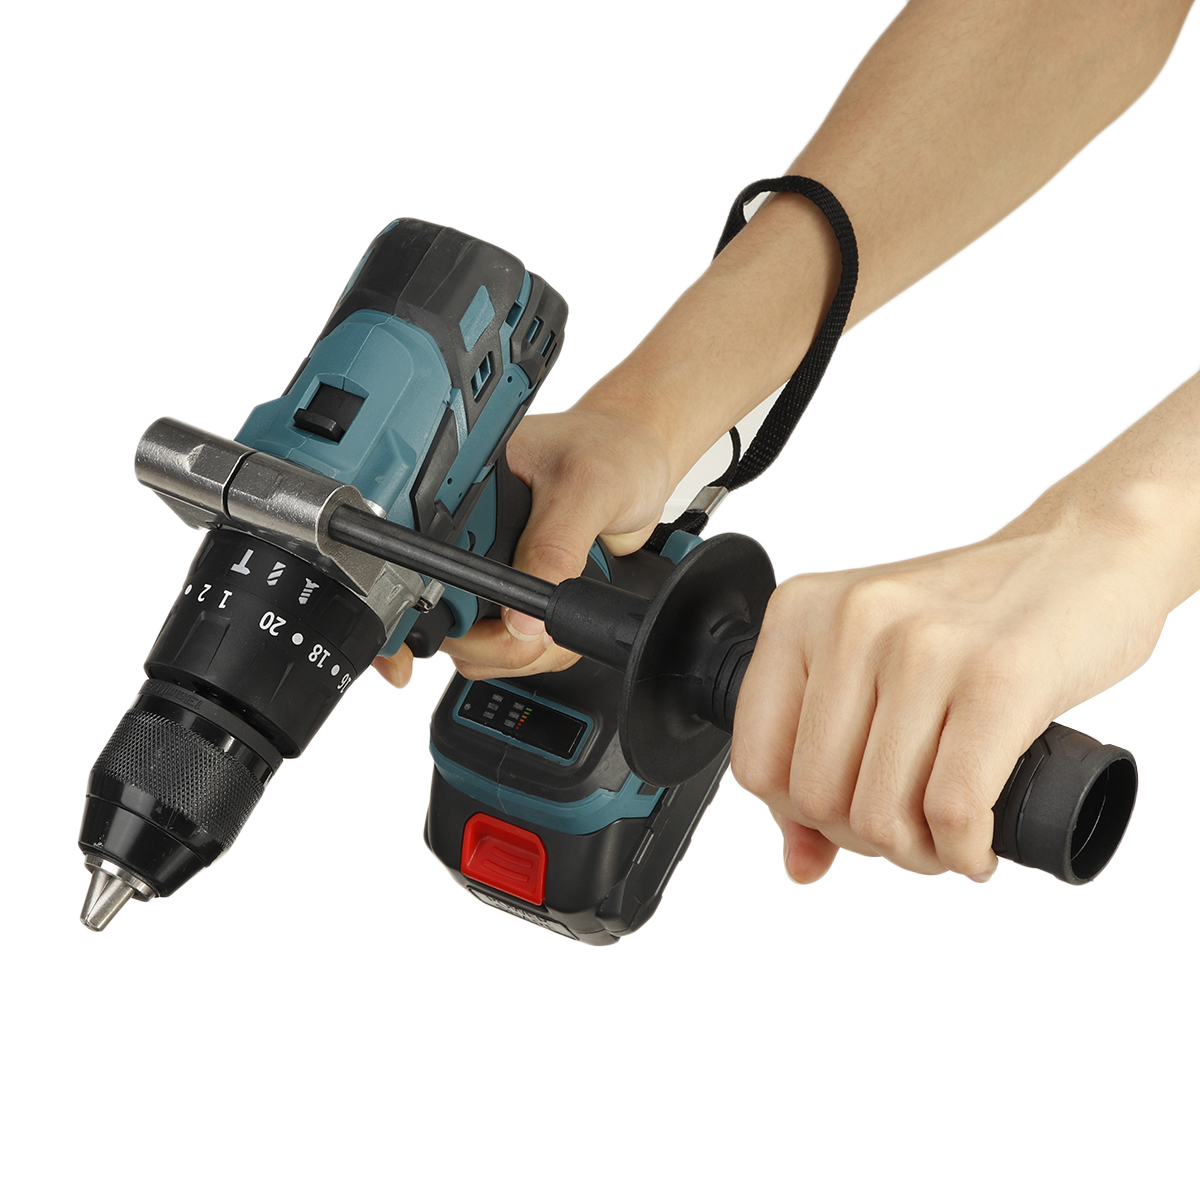 Cordless-Electric-Impact-Drill-3-in-1-Rechargeable-Drill-Screwdriver-13mm-Chuck-W-1-or-2-Li-ion-Batt-1803323-12